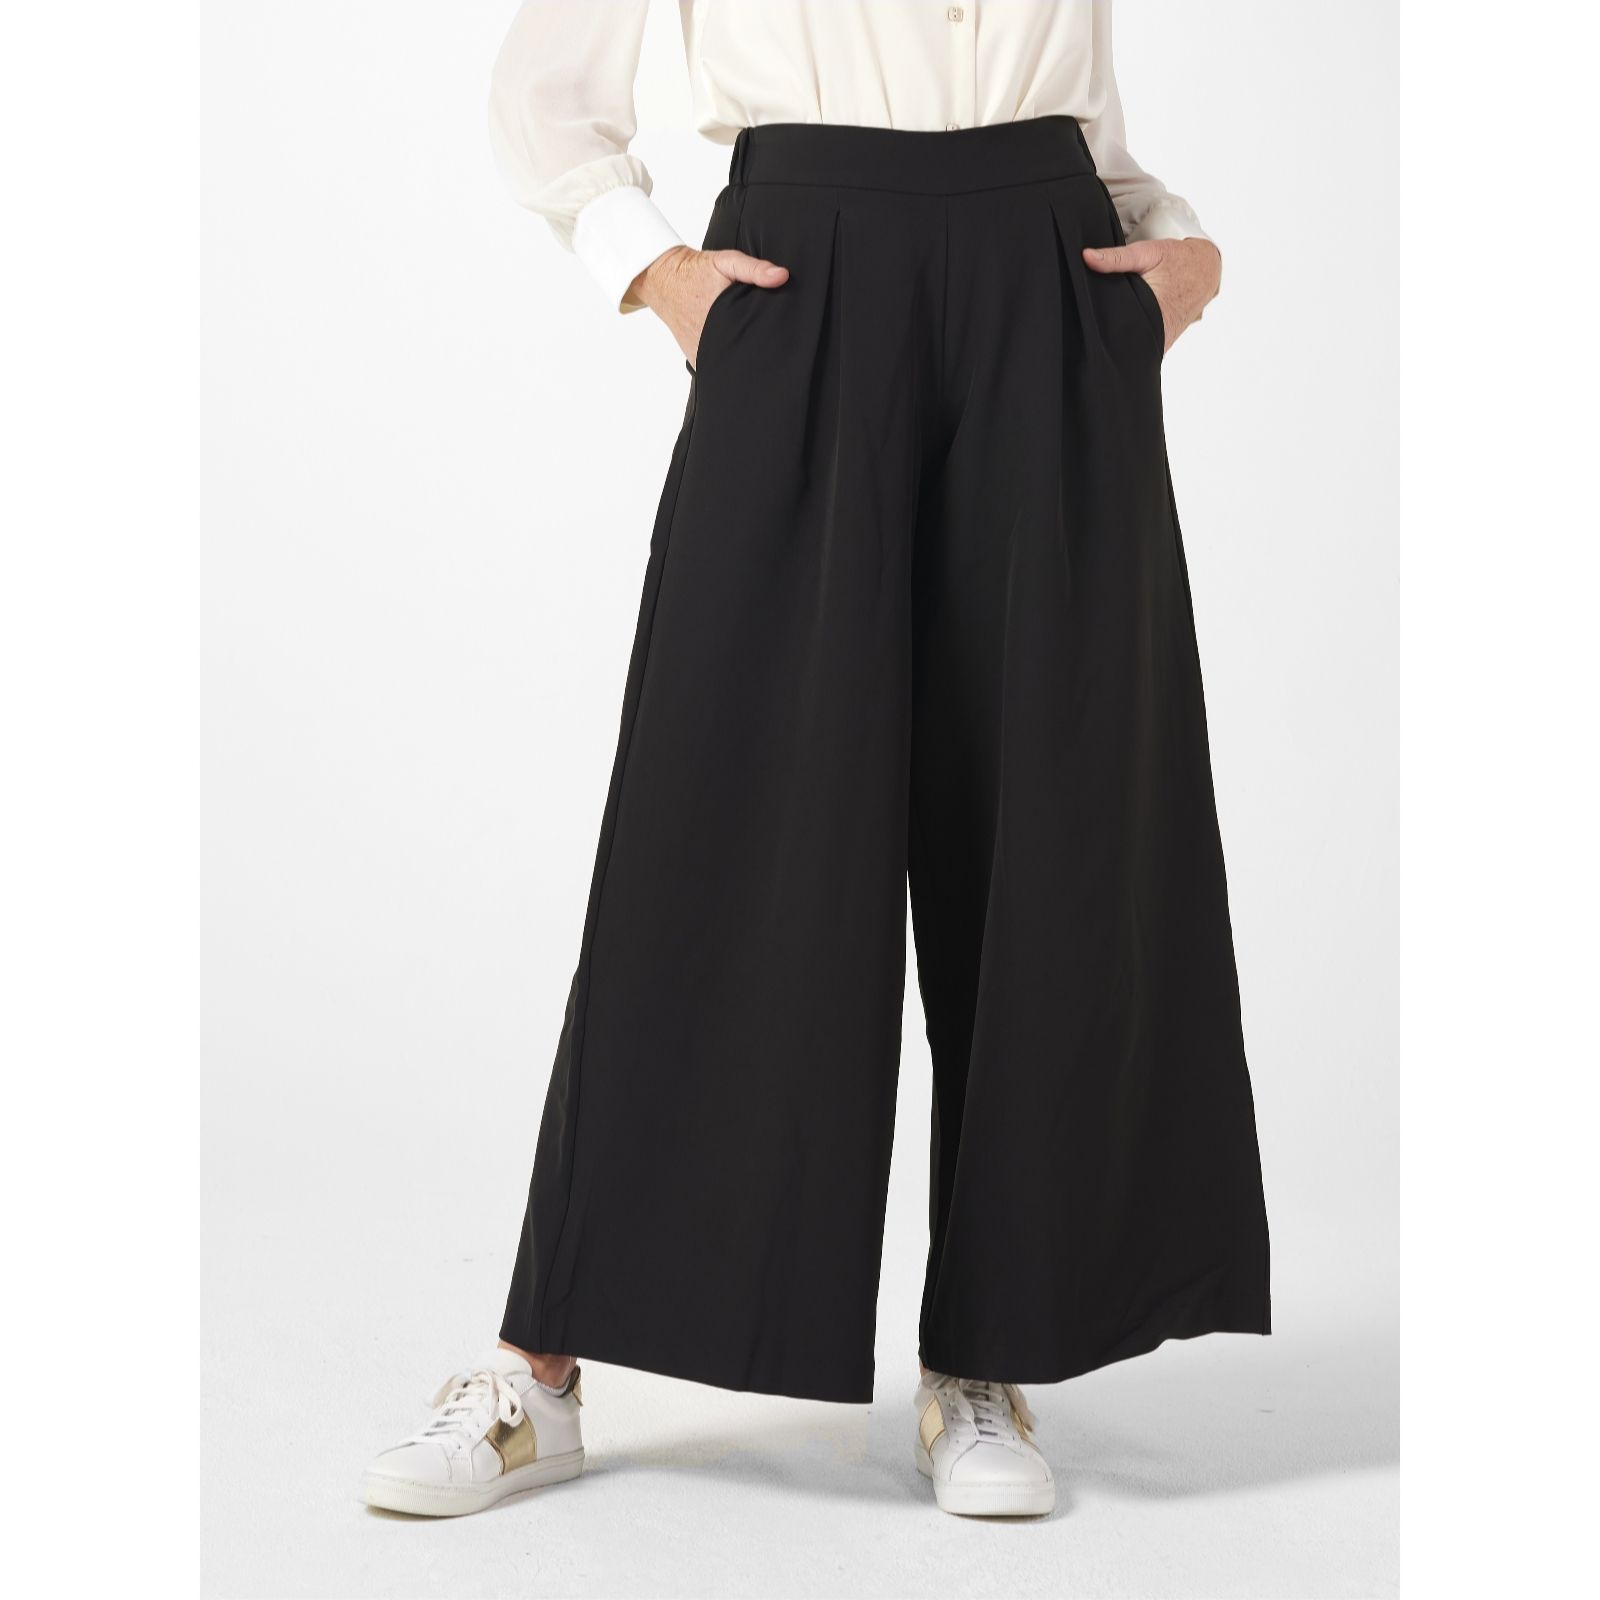 Wynne Collection Pleated Skirt Trousers - QVC UK